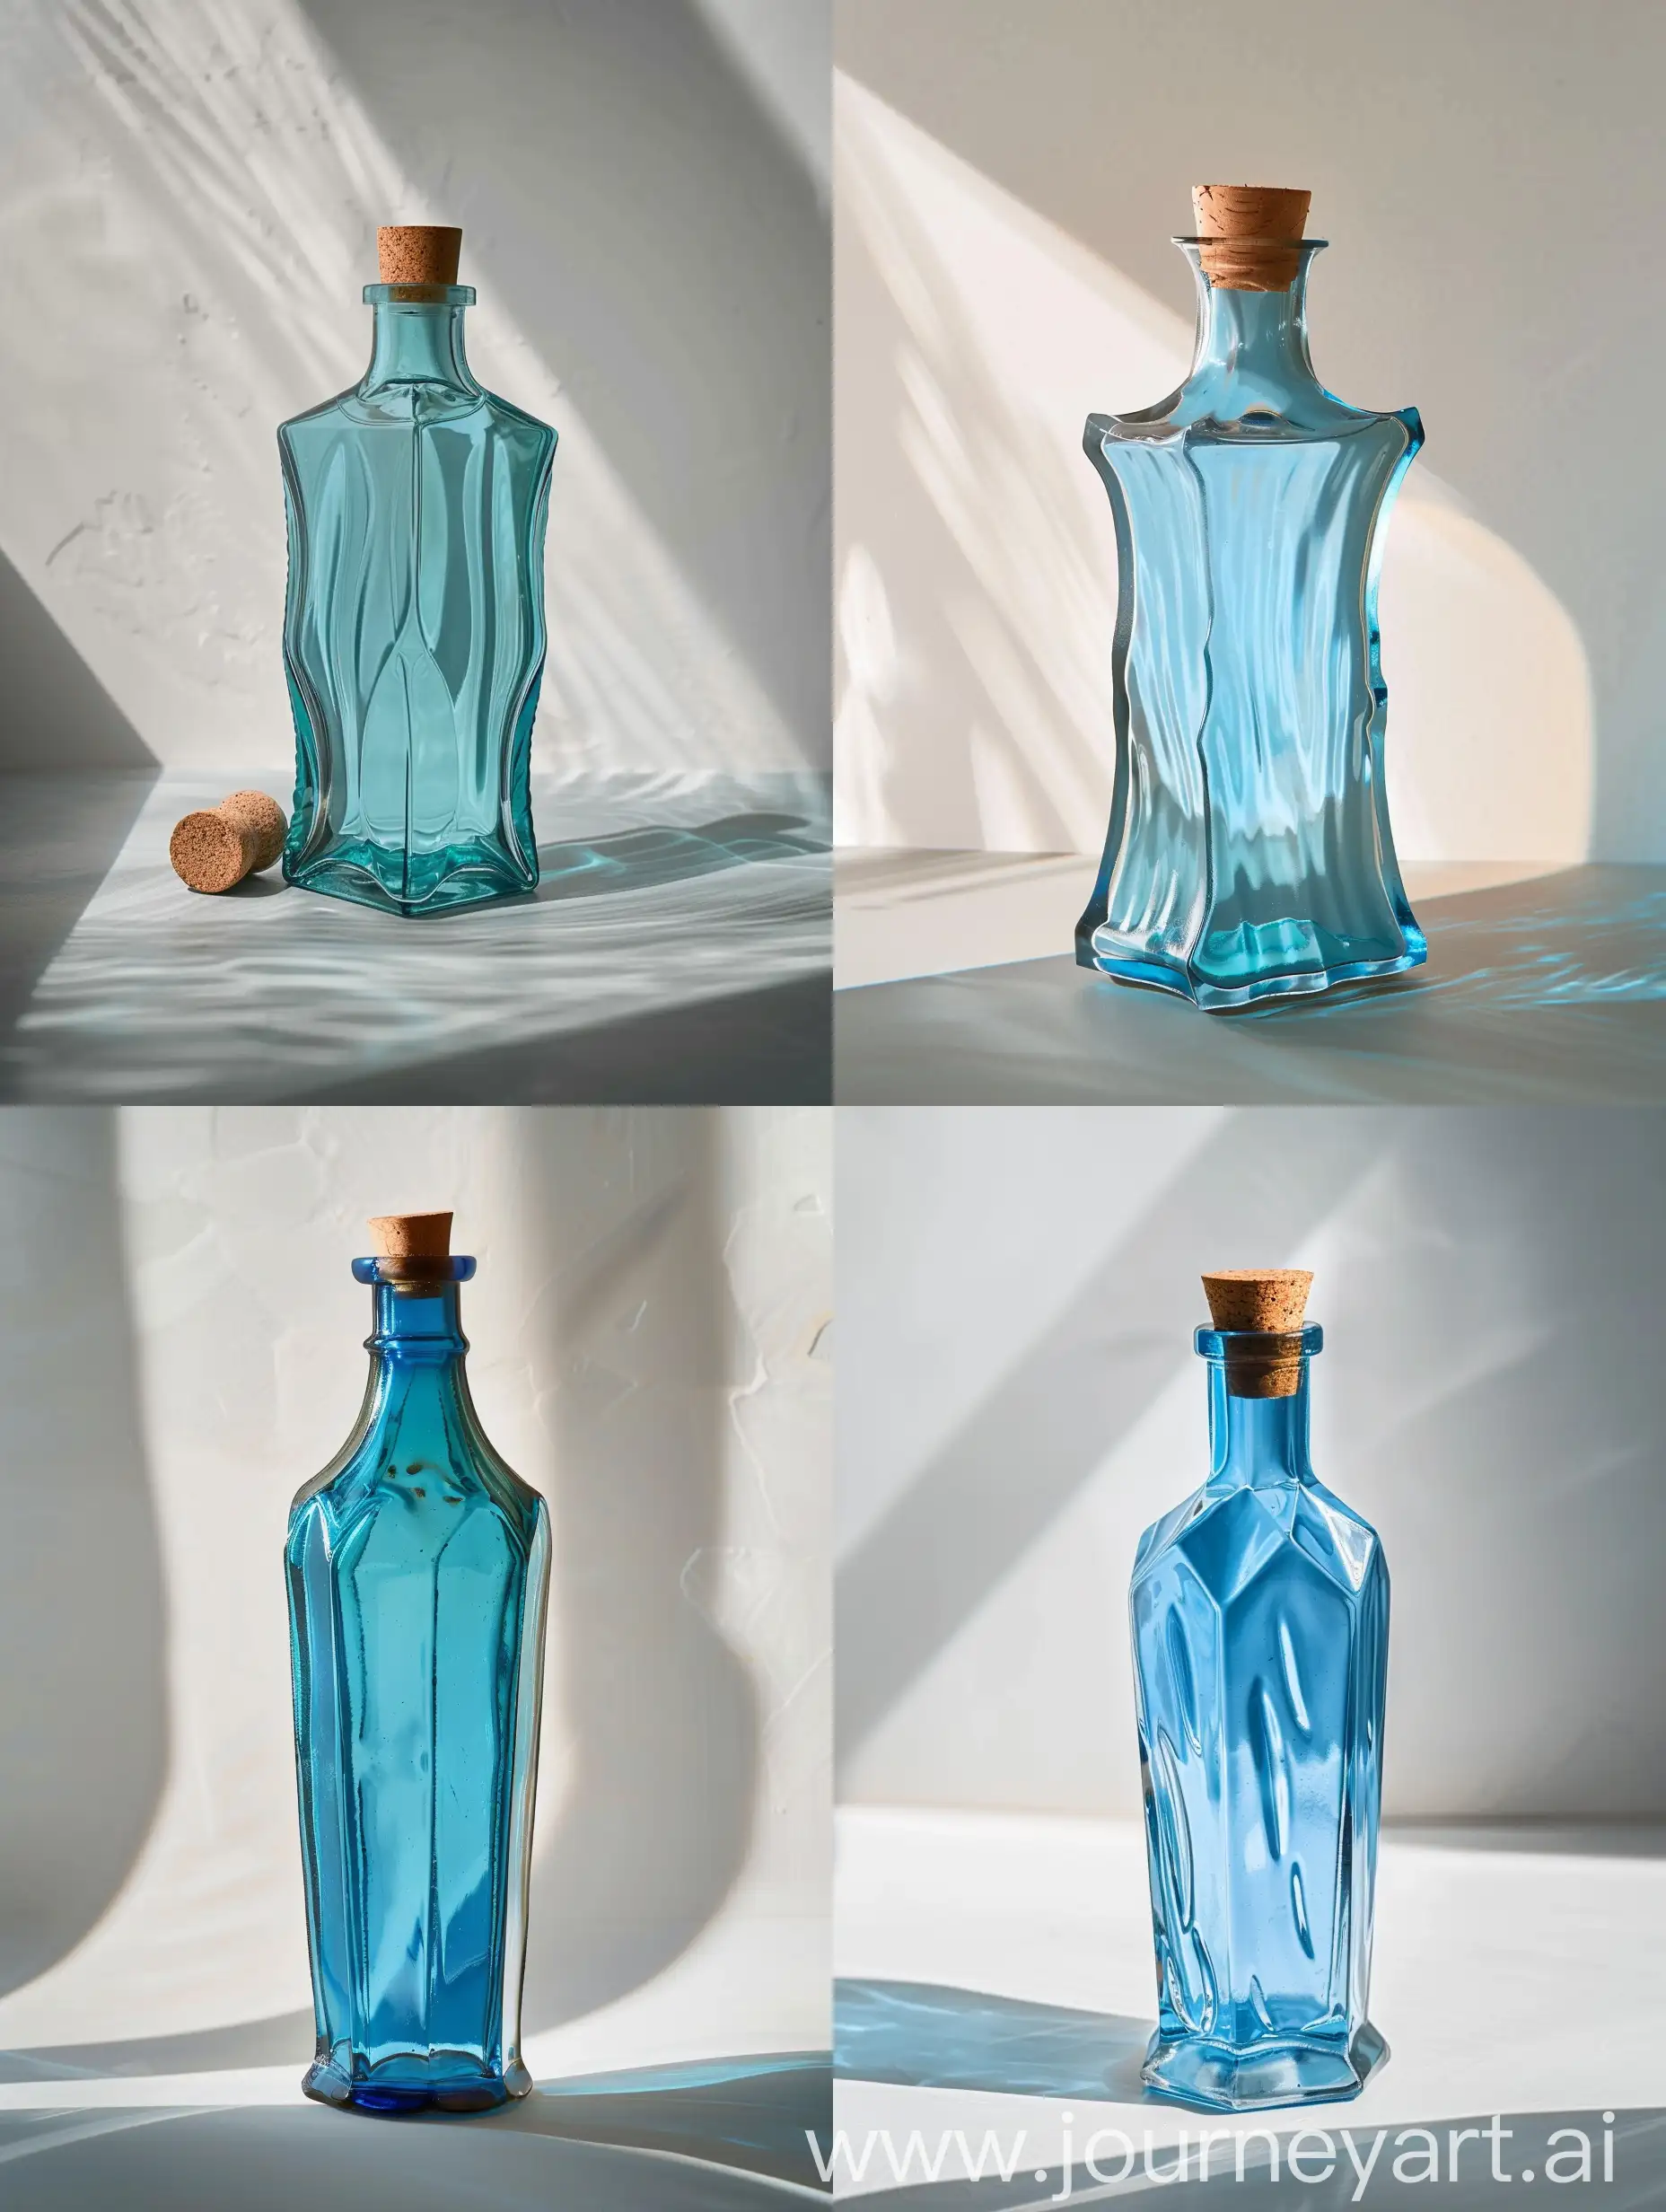 Elongated-Blue-Glass-Bottle-with-Wooden-Cork-on-Light-Gray-Background